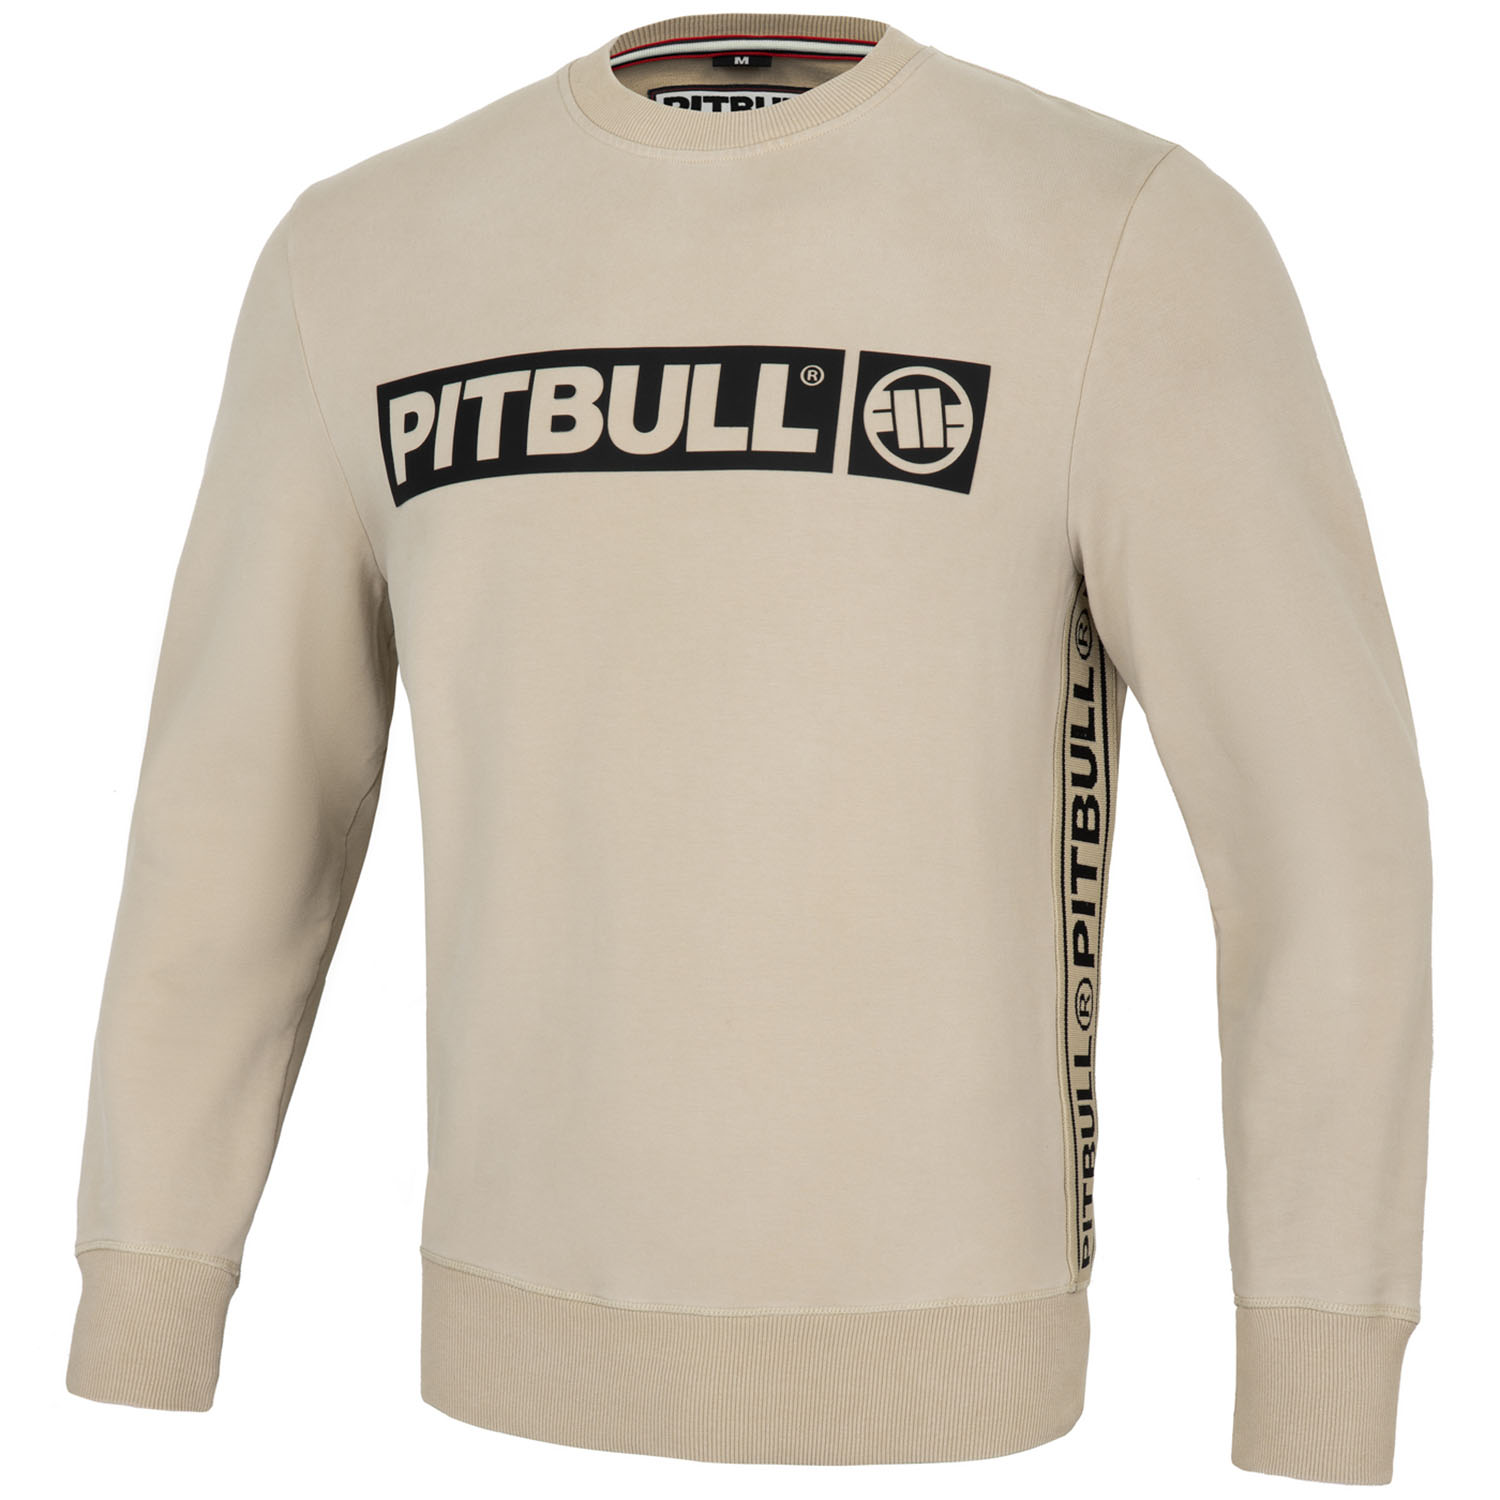 Pit Bull West Coast Pullover, Albion, sand, S